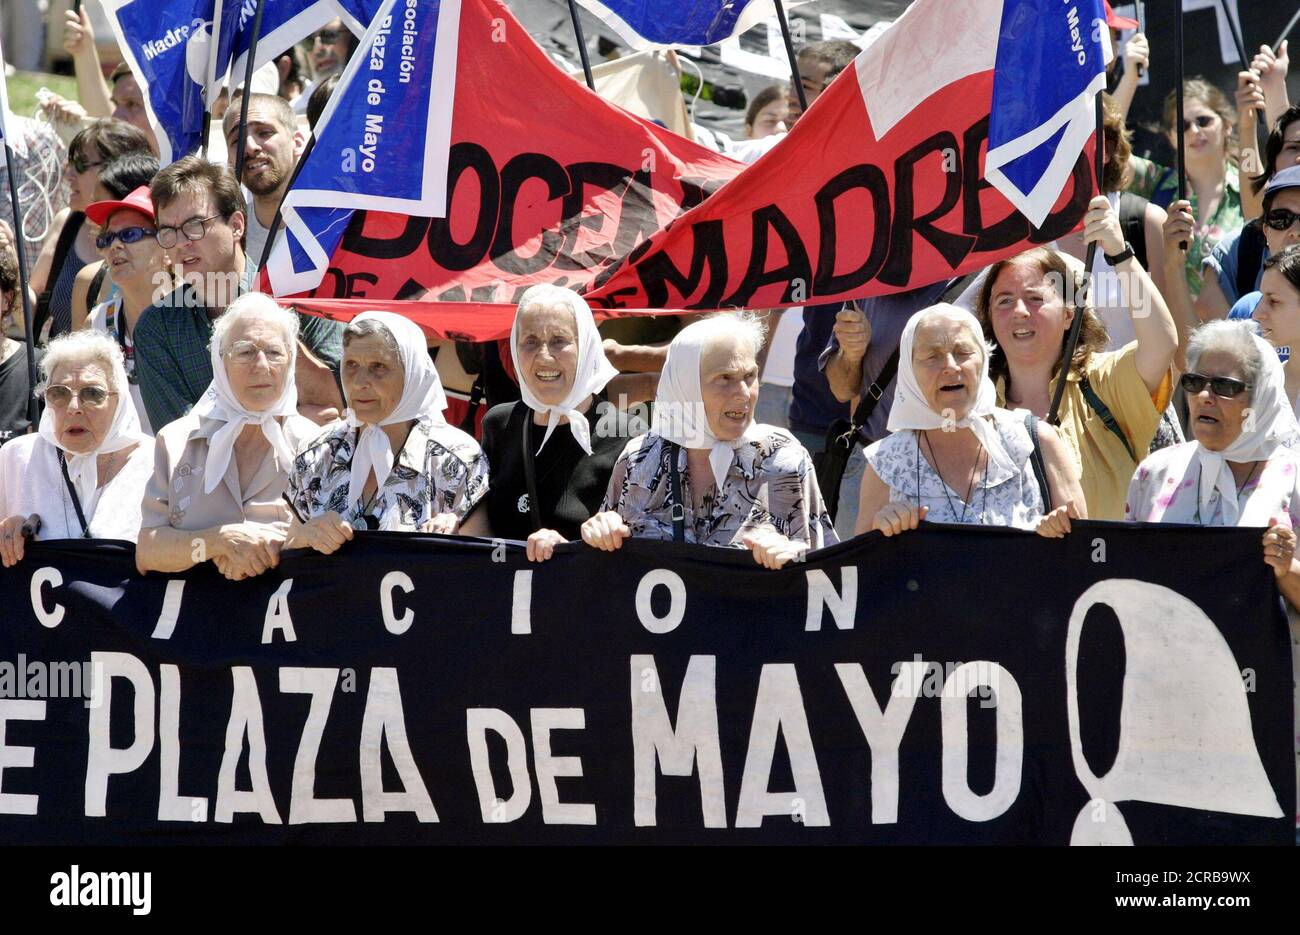 Members of the Argentina's humans rights group Madres de Plaza de Mayo march during a rally to commemorate the second anniversary of Fernando de la Rua's resignation of the presidency, in Buenos